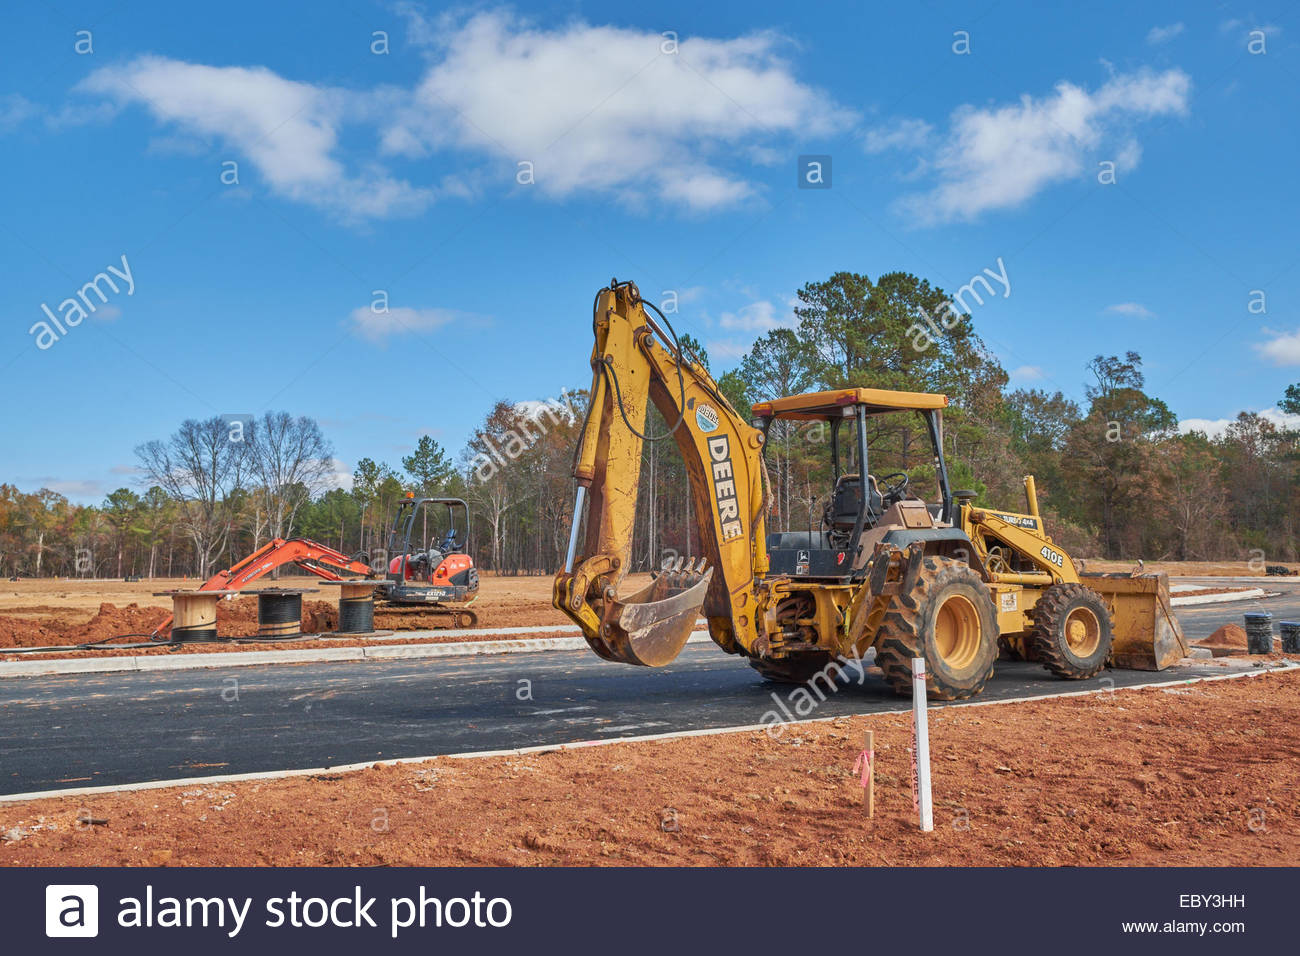 A John Deere Backhoe Front Loader In The Foreground With